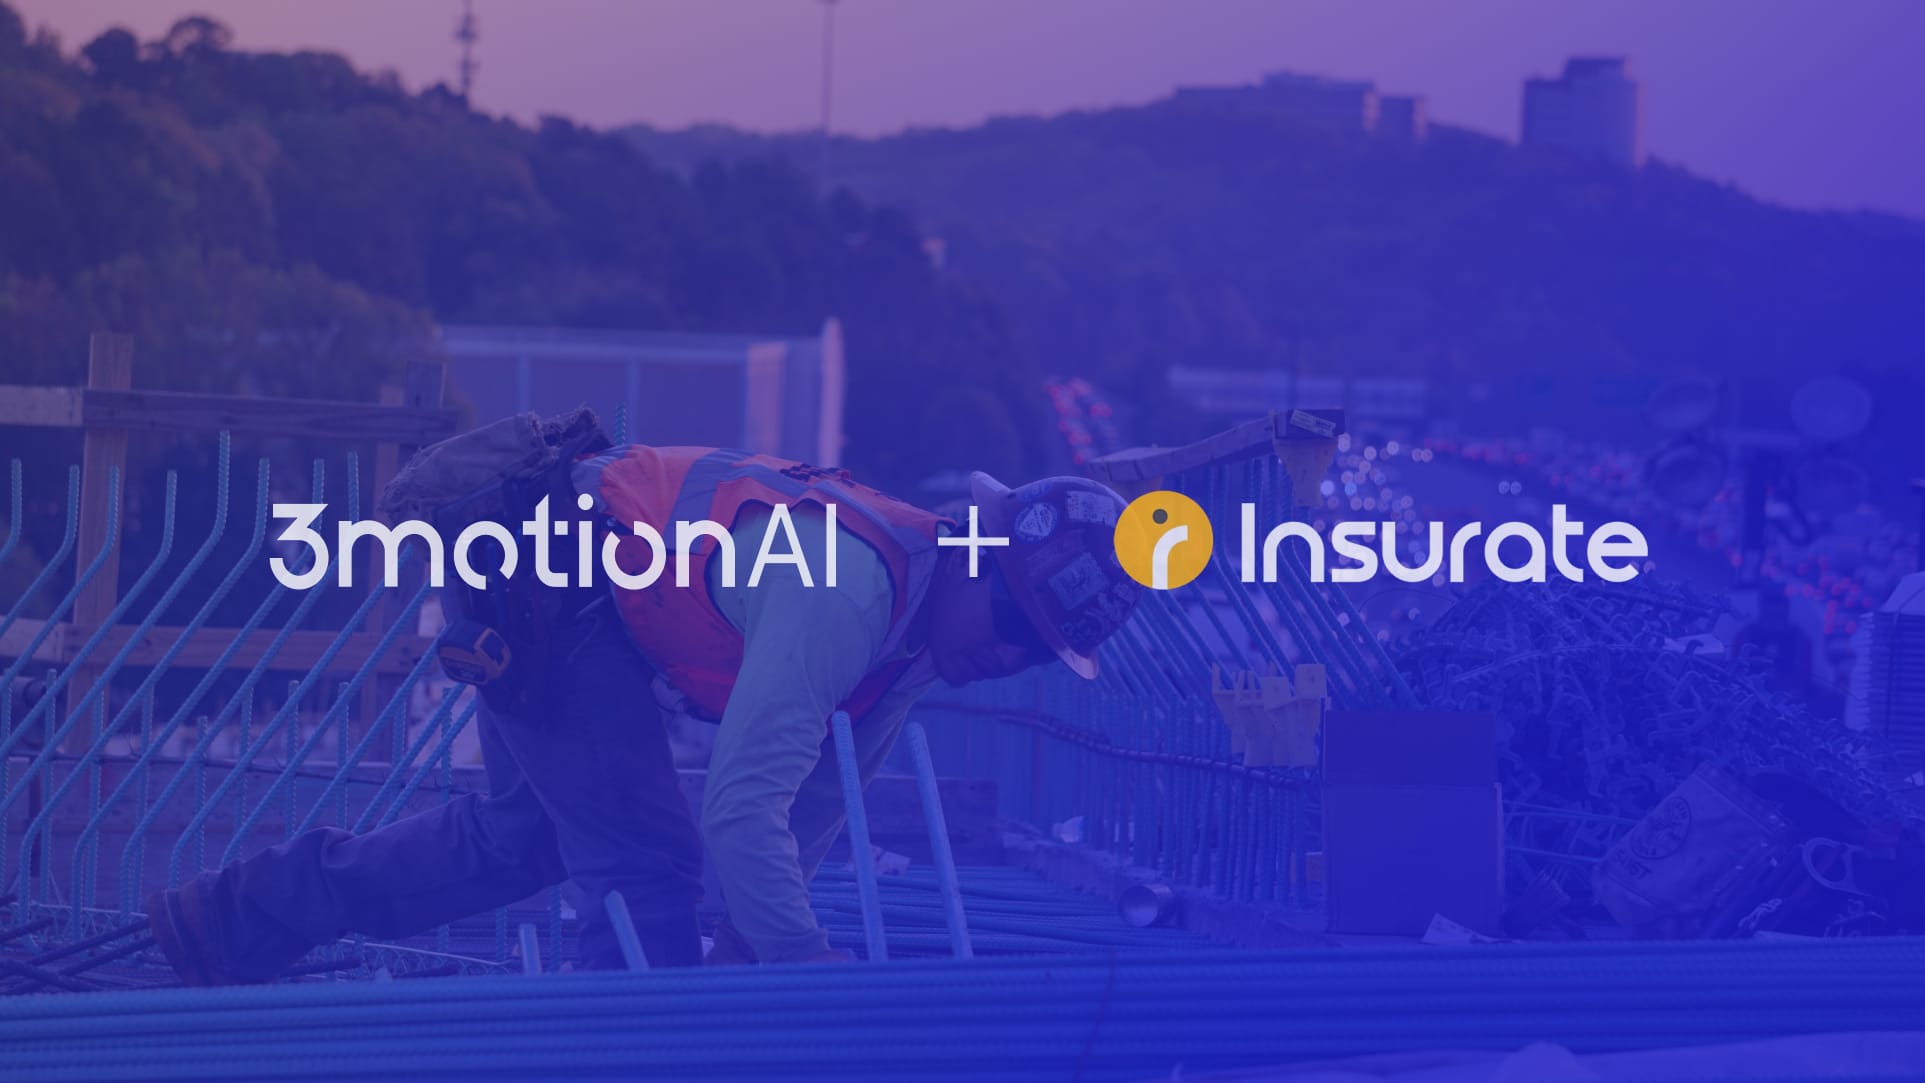 Insurate and 3motionAi forge partnership.